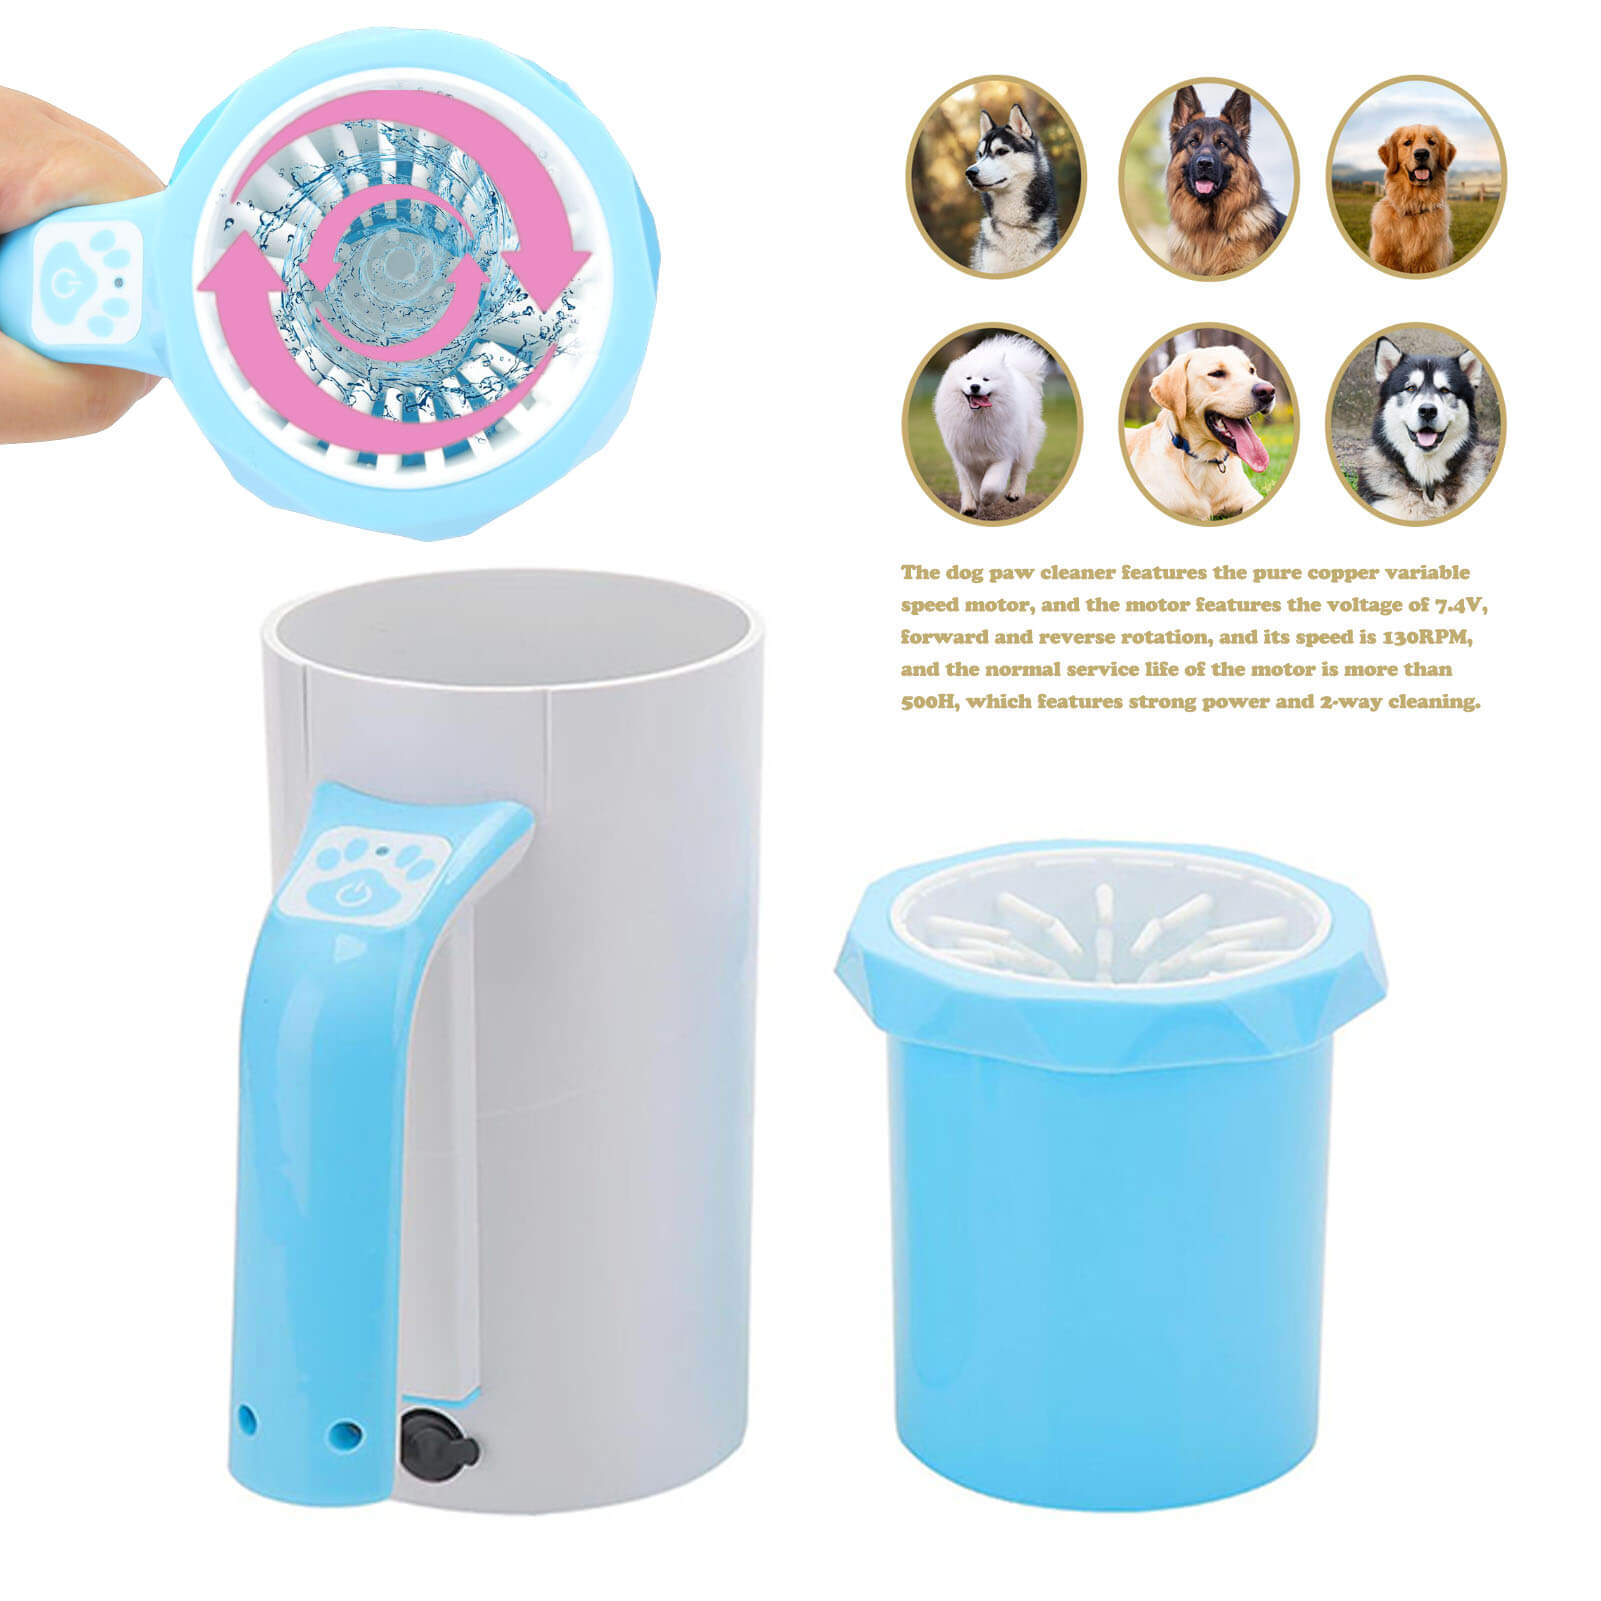 Clawsome Automatic Dog Paw Cleaner